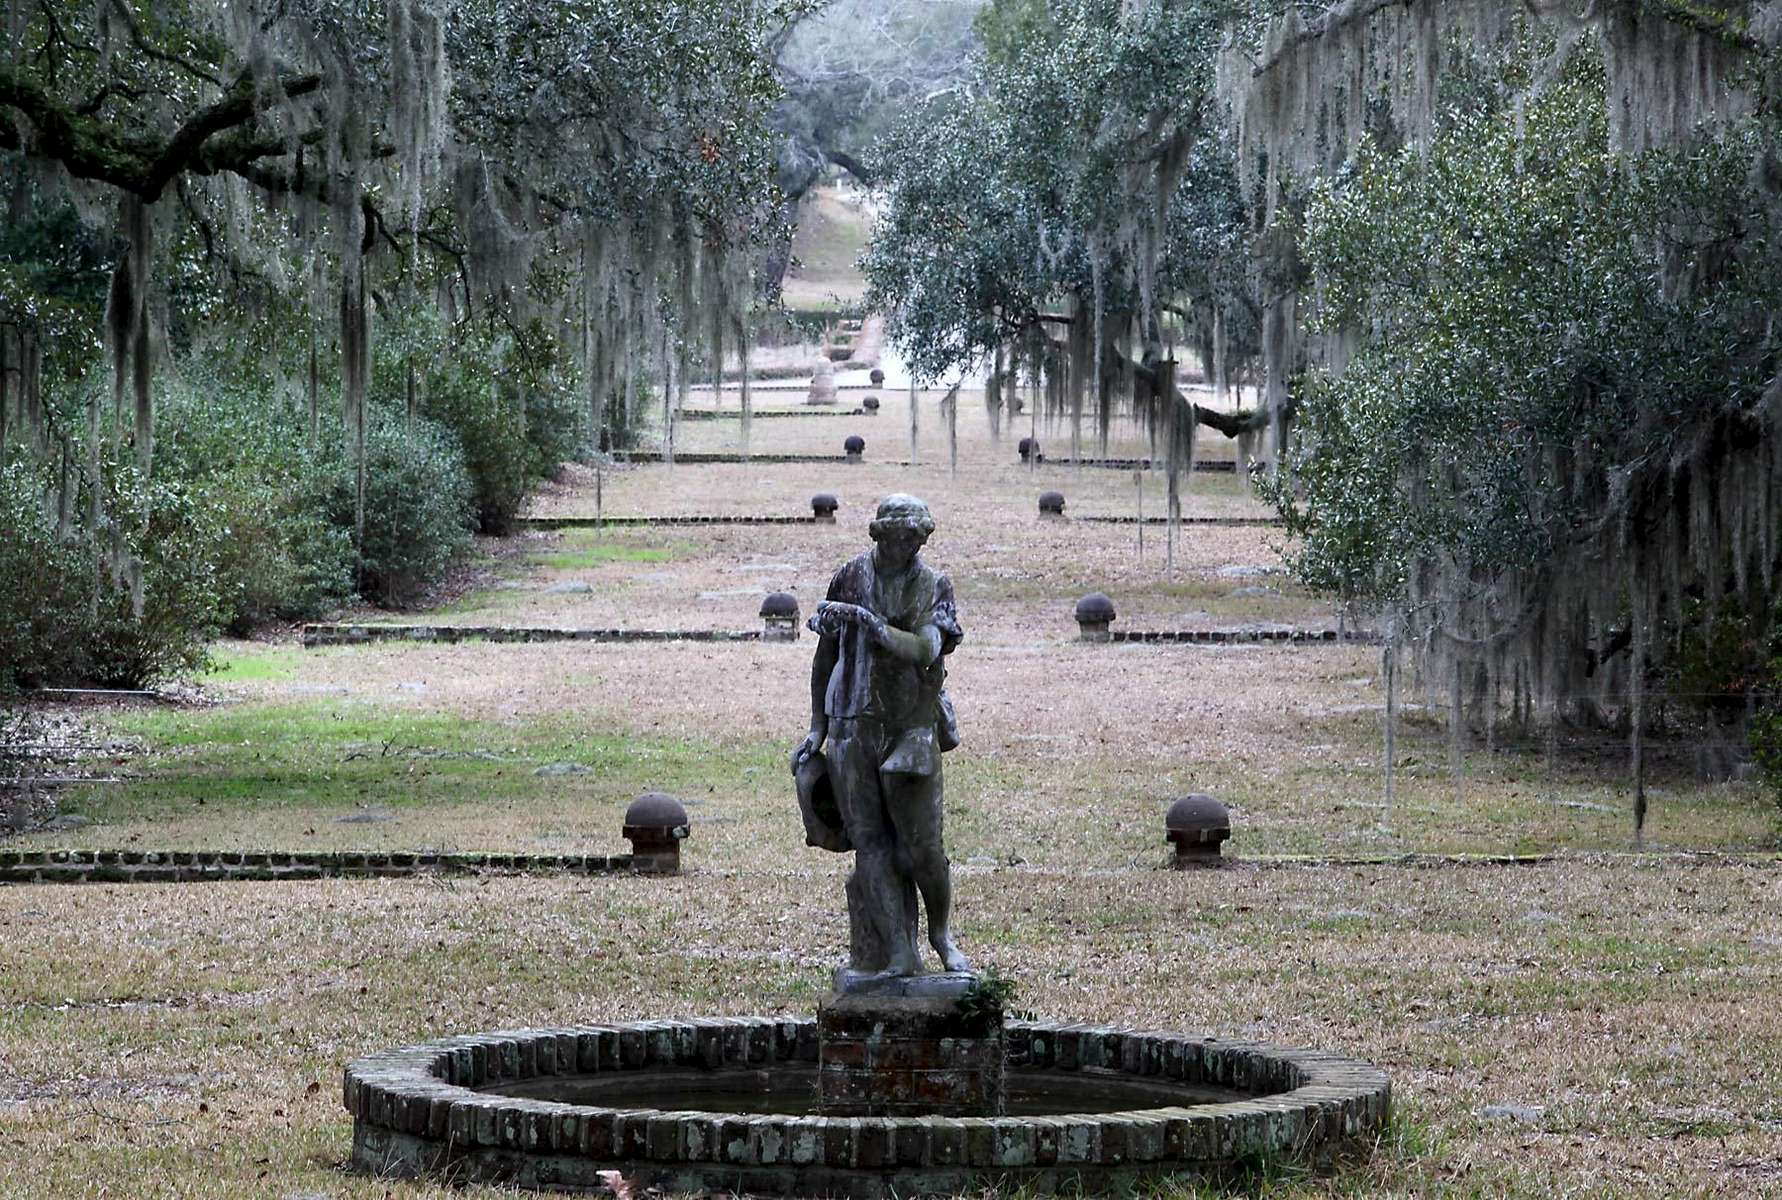 A sculpture adorns the front grounds at Medway Plantation February 17, 2012, in Goose Creek, S.C. The plantation contains 6728 acres of land and is staffed by 7 full-time employees. Upkeep on the property can run as high as $500,000 a year. In the South Carolina Lowcountry, more than a half-dozen antebellum plantations, which don't change hands often, are for sale.   REUTERS/Randall Hill